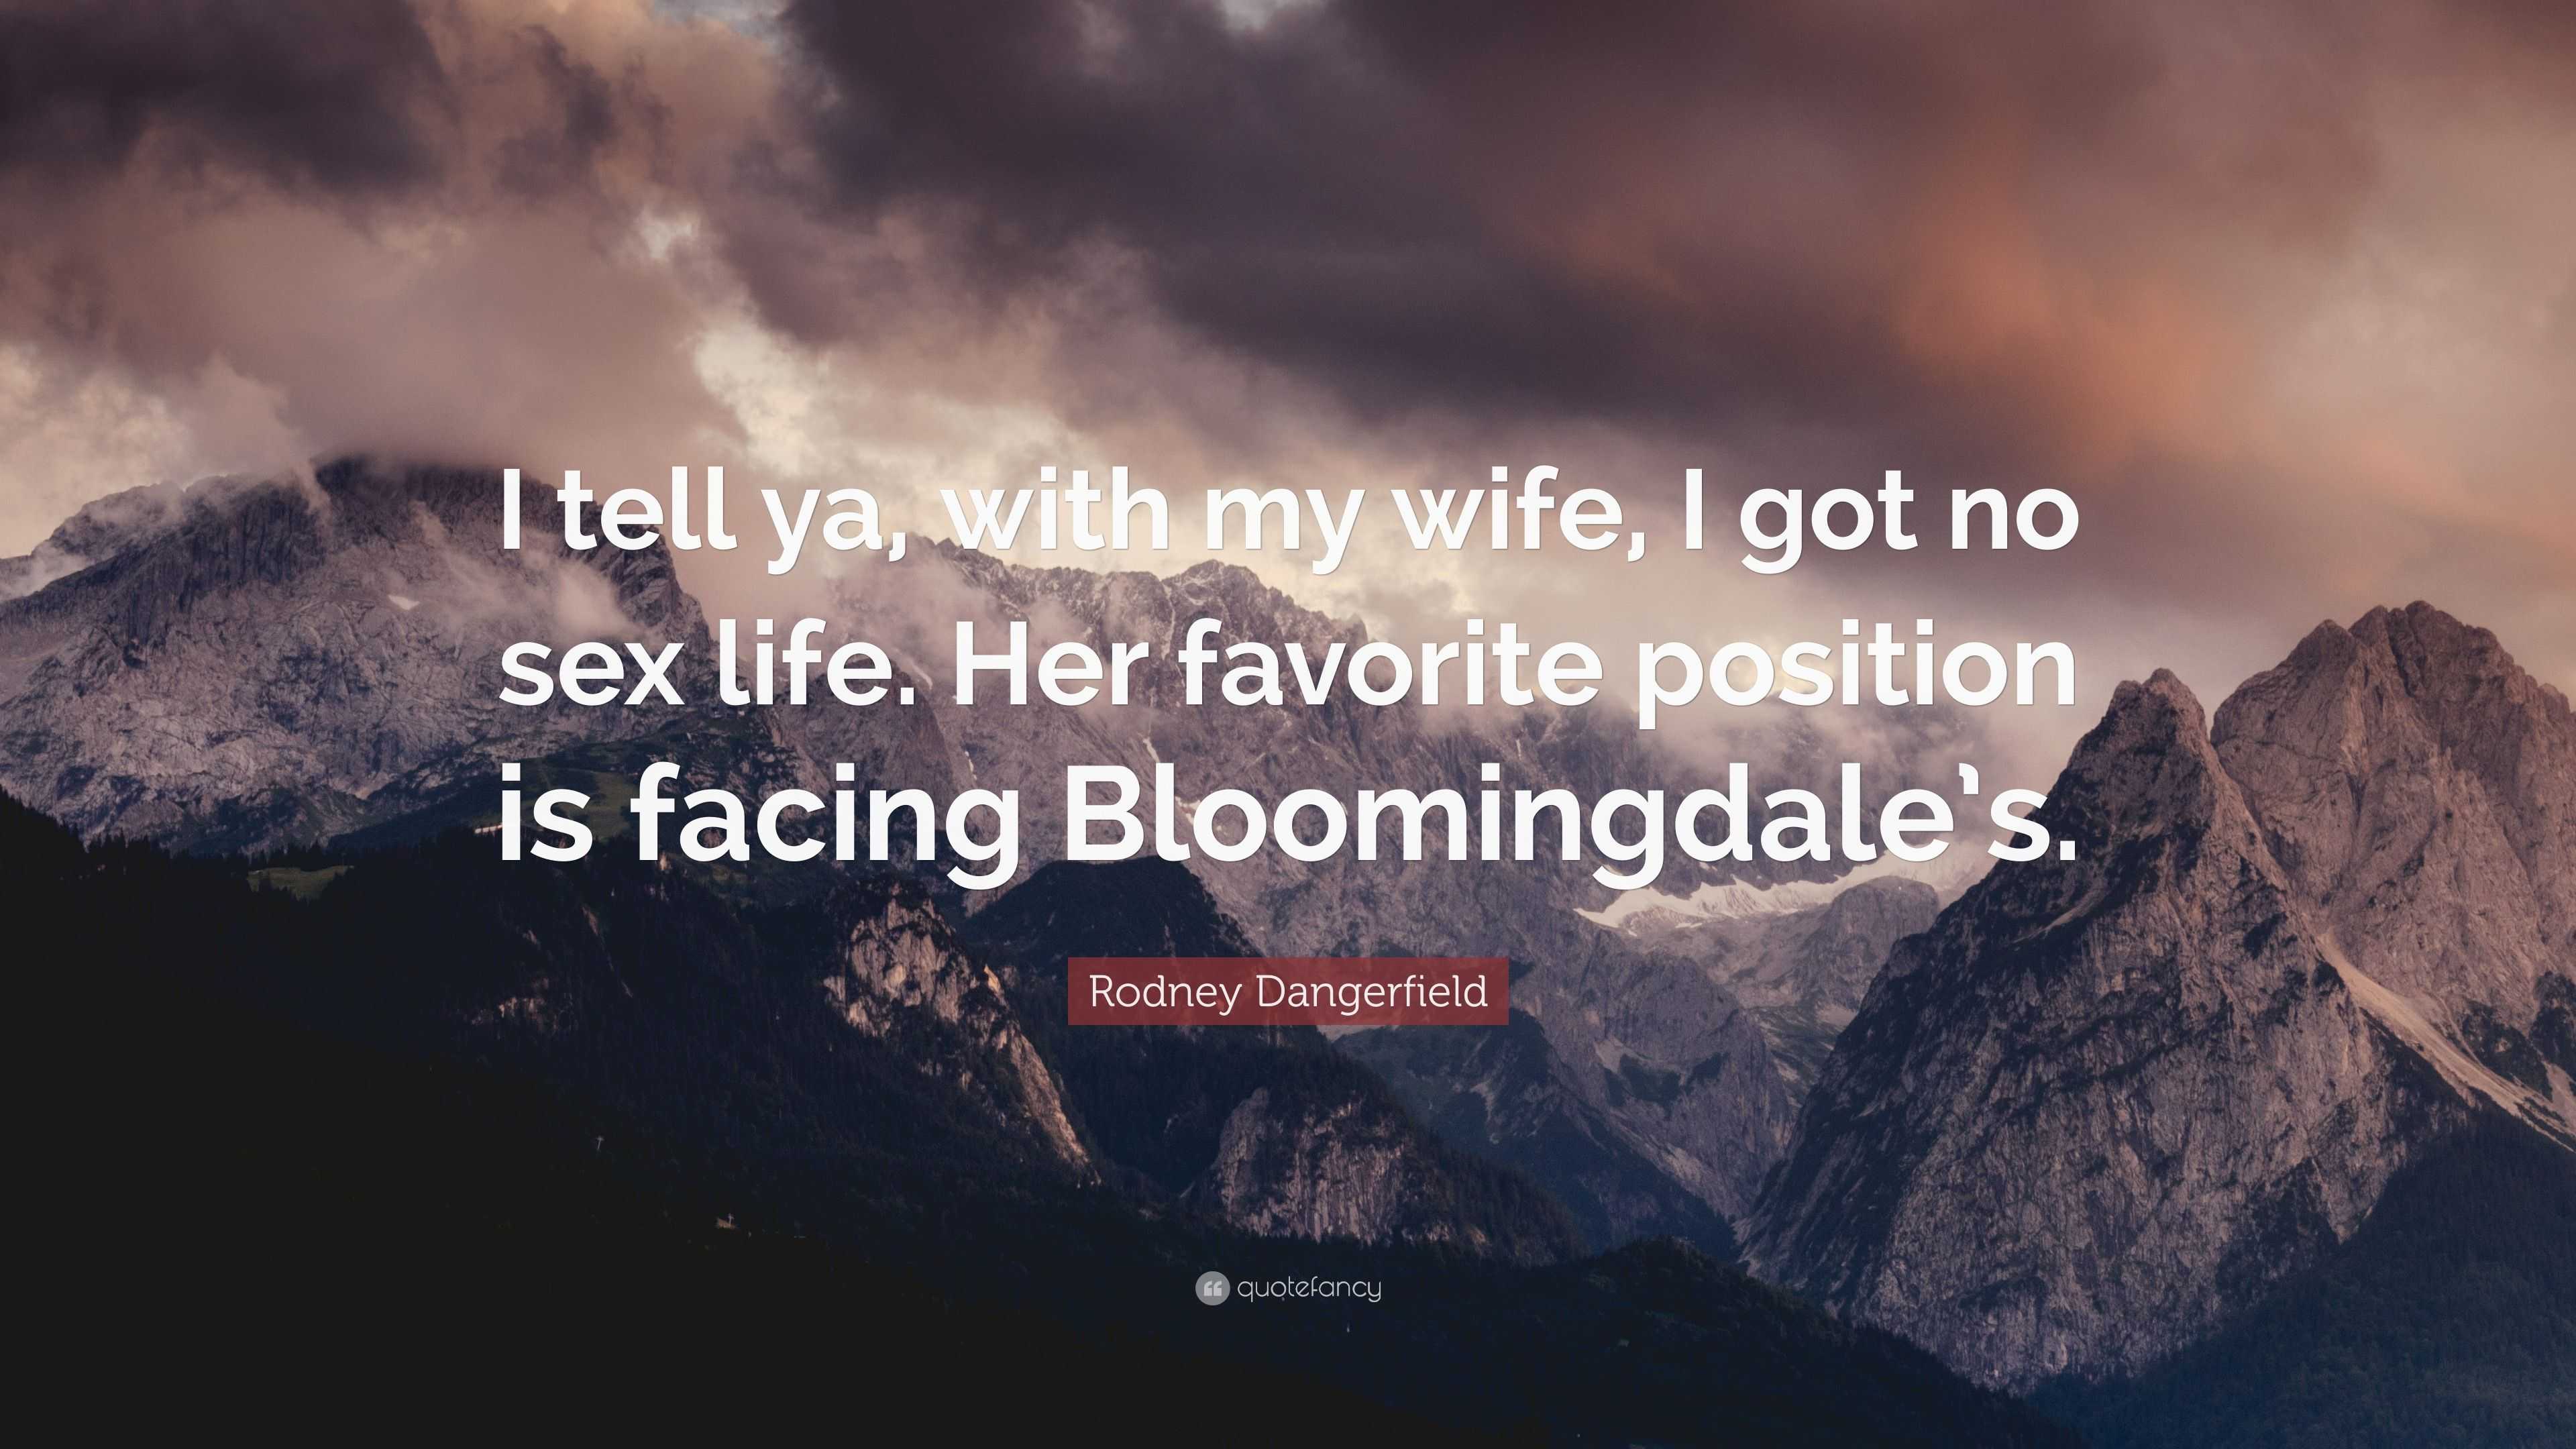 Rodney Dangerfield Quote “I tell ya, with my wife, I got no sex life pic